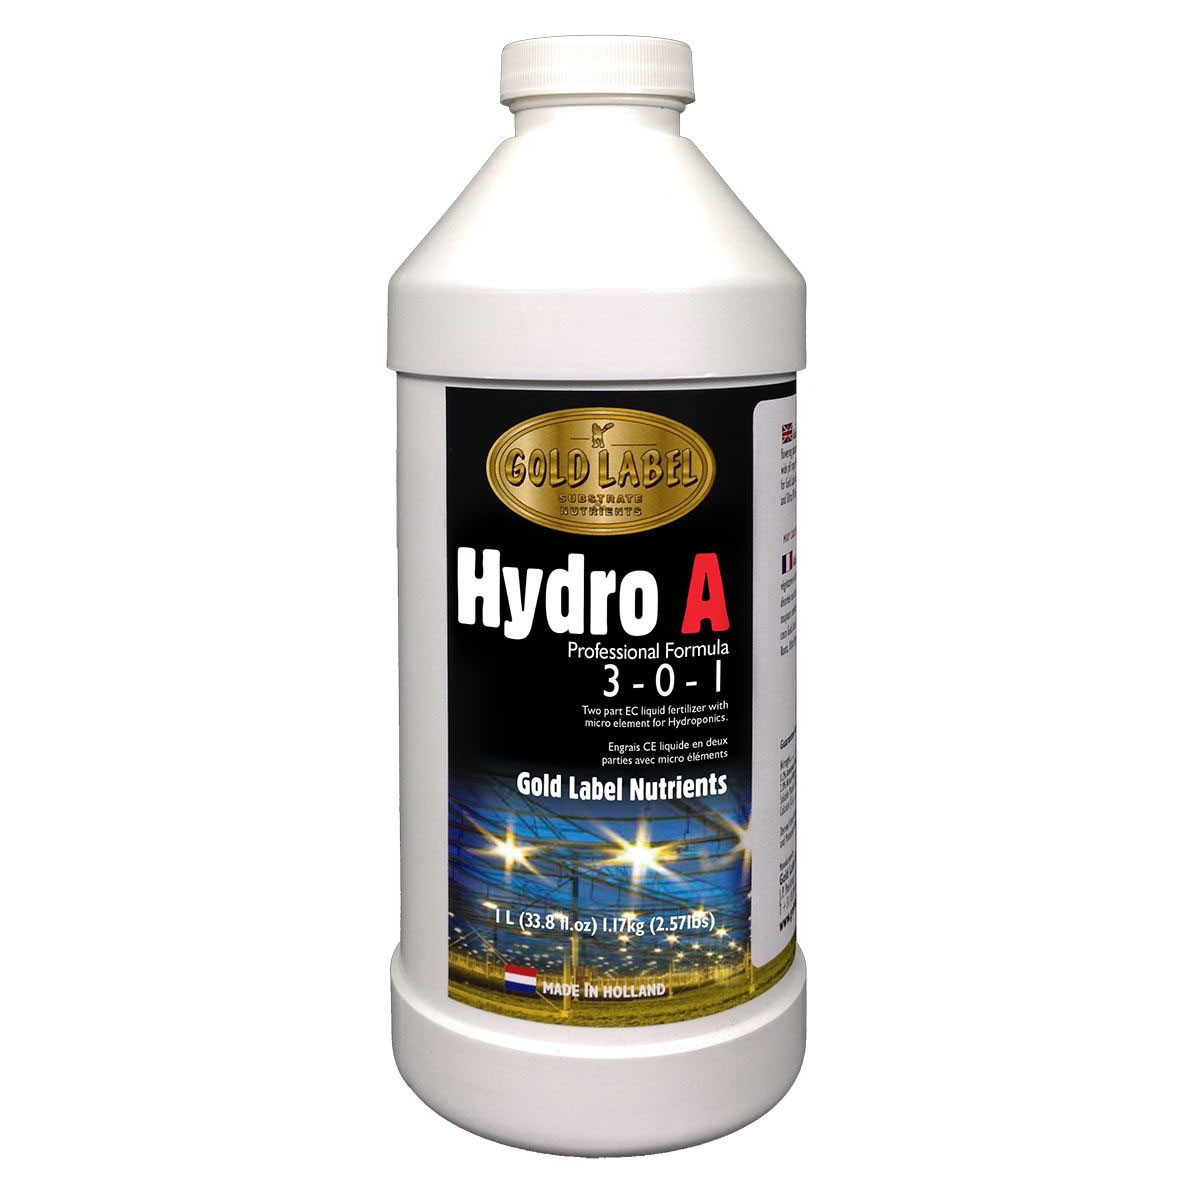 HydroCoco A by Gold Label